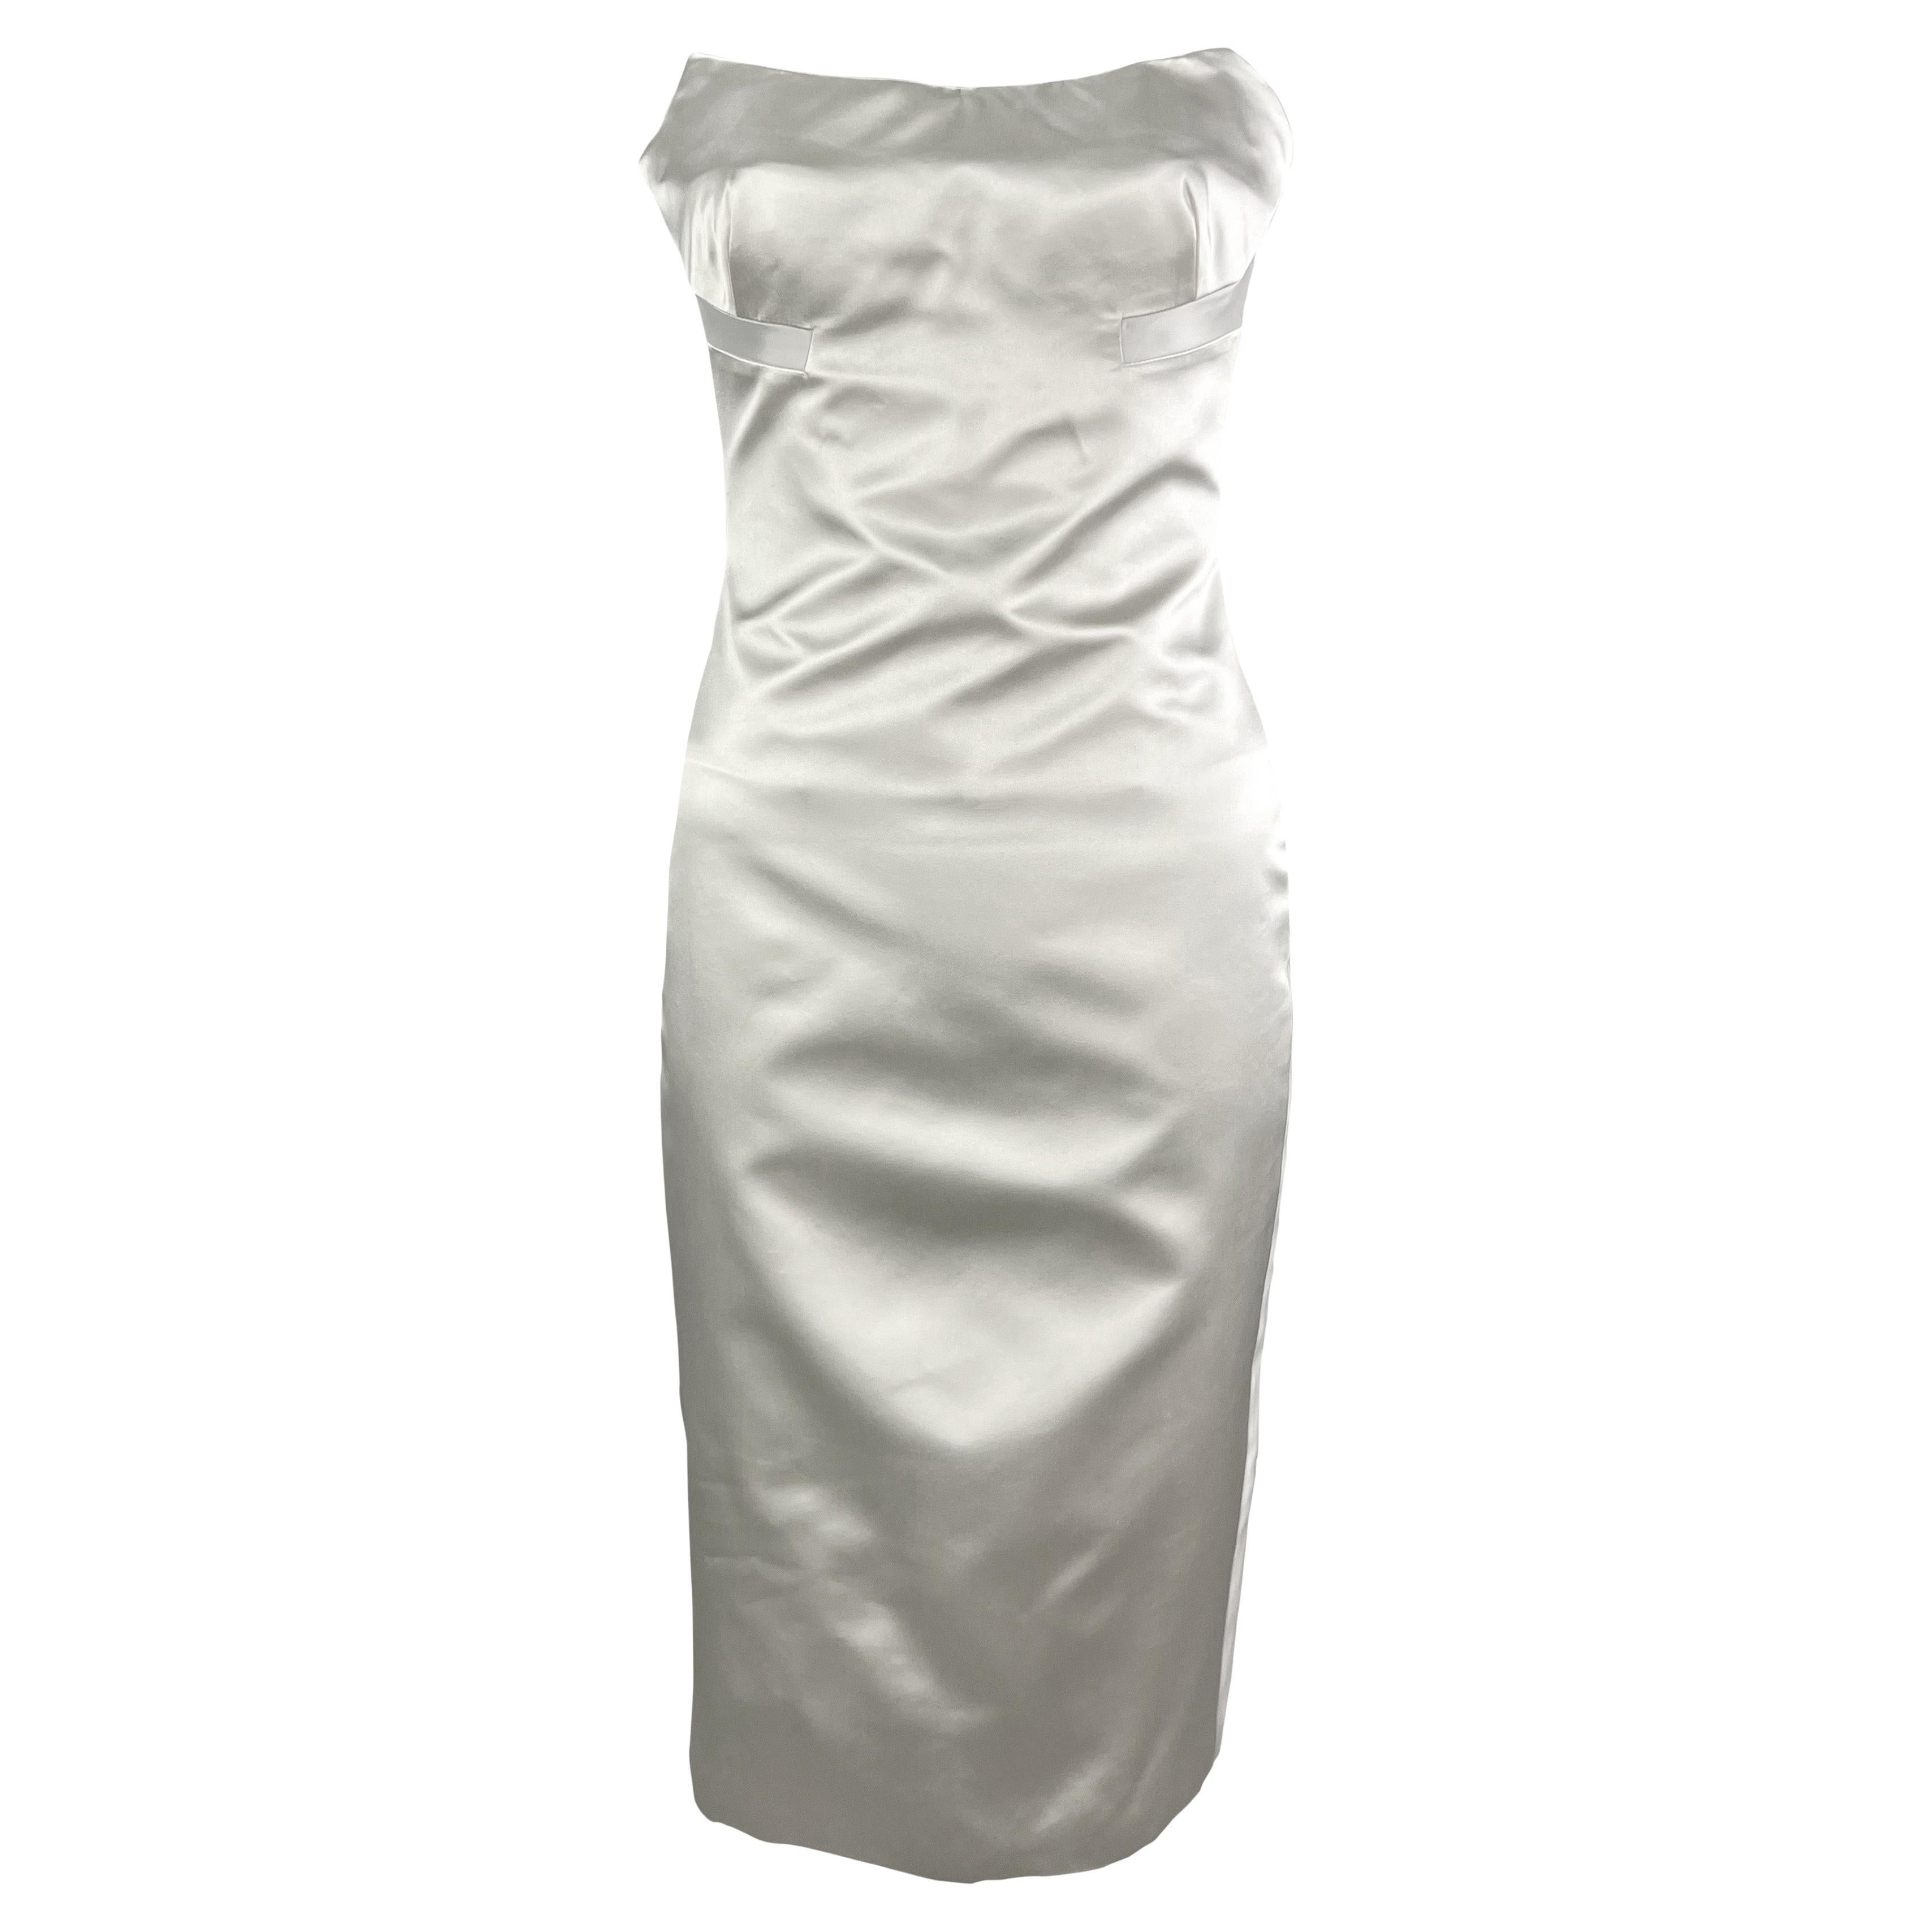 NWT S/S 2001 Gucci by Tom Ford Runway Ad Corset White Silk Satin Strapless Dress For Sale